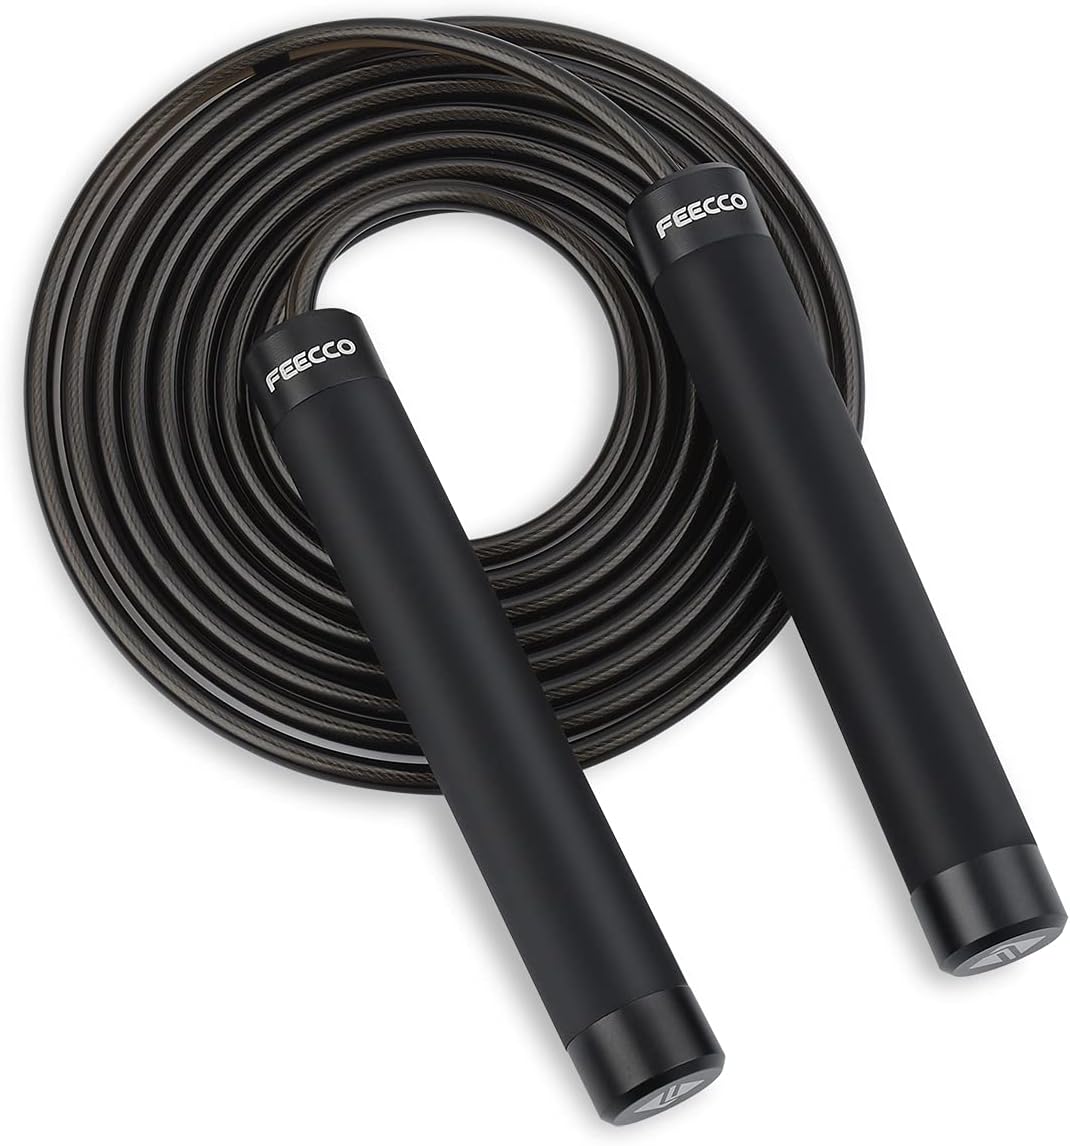 FEECCO Burno Lite 1/2 lb Weighted Jump Rope for Boxing,Cardio